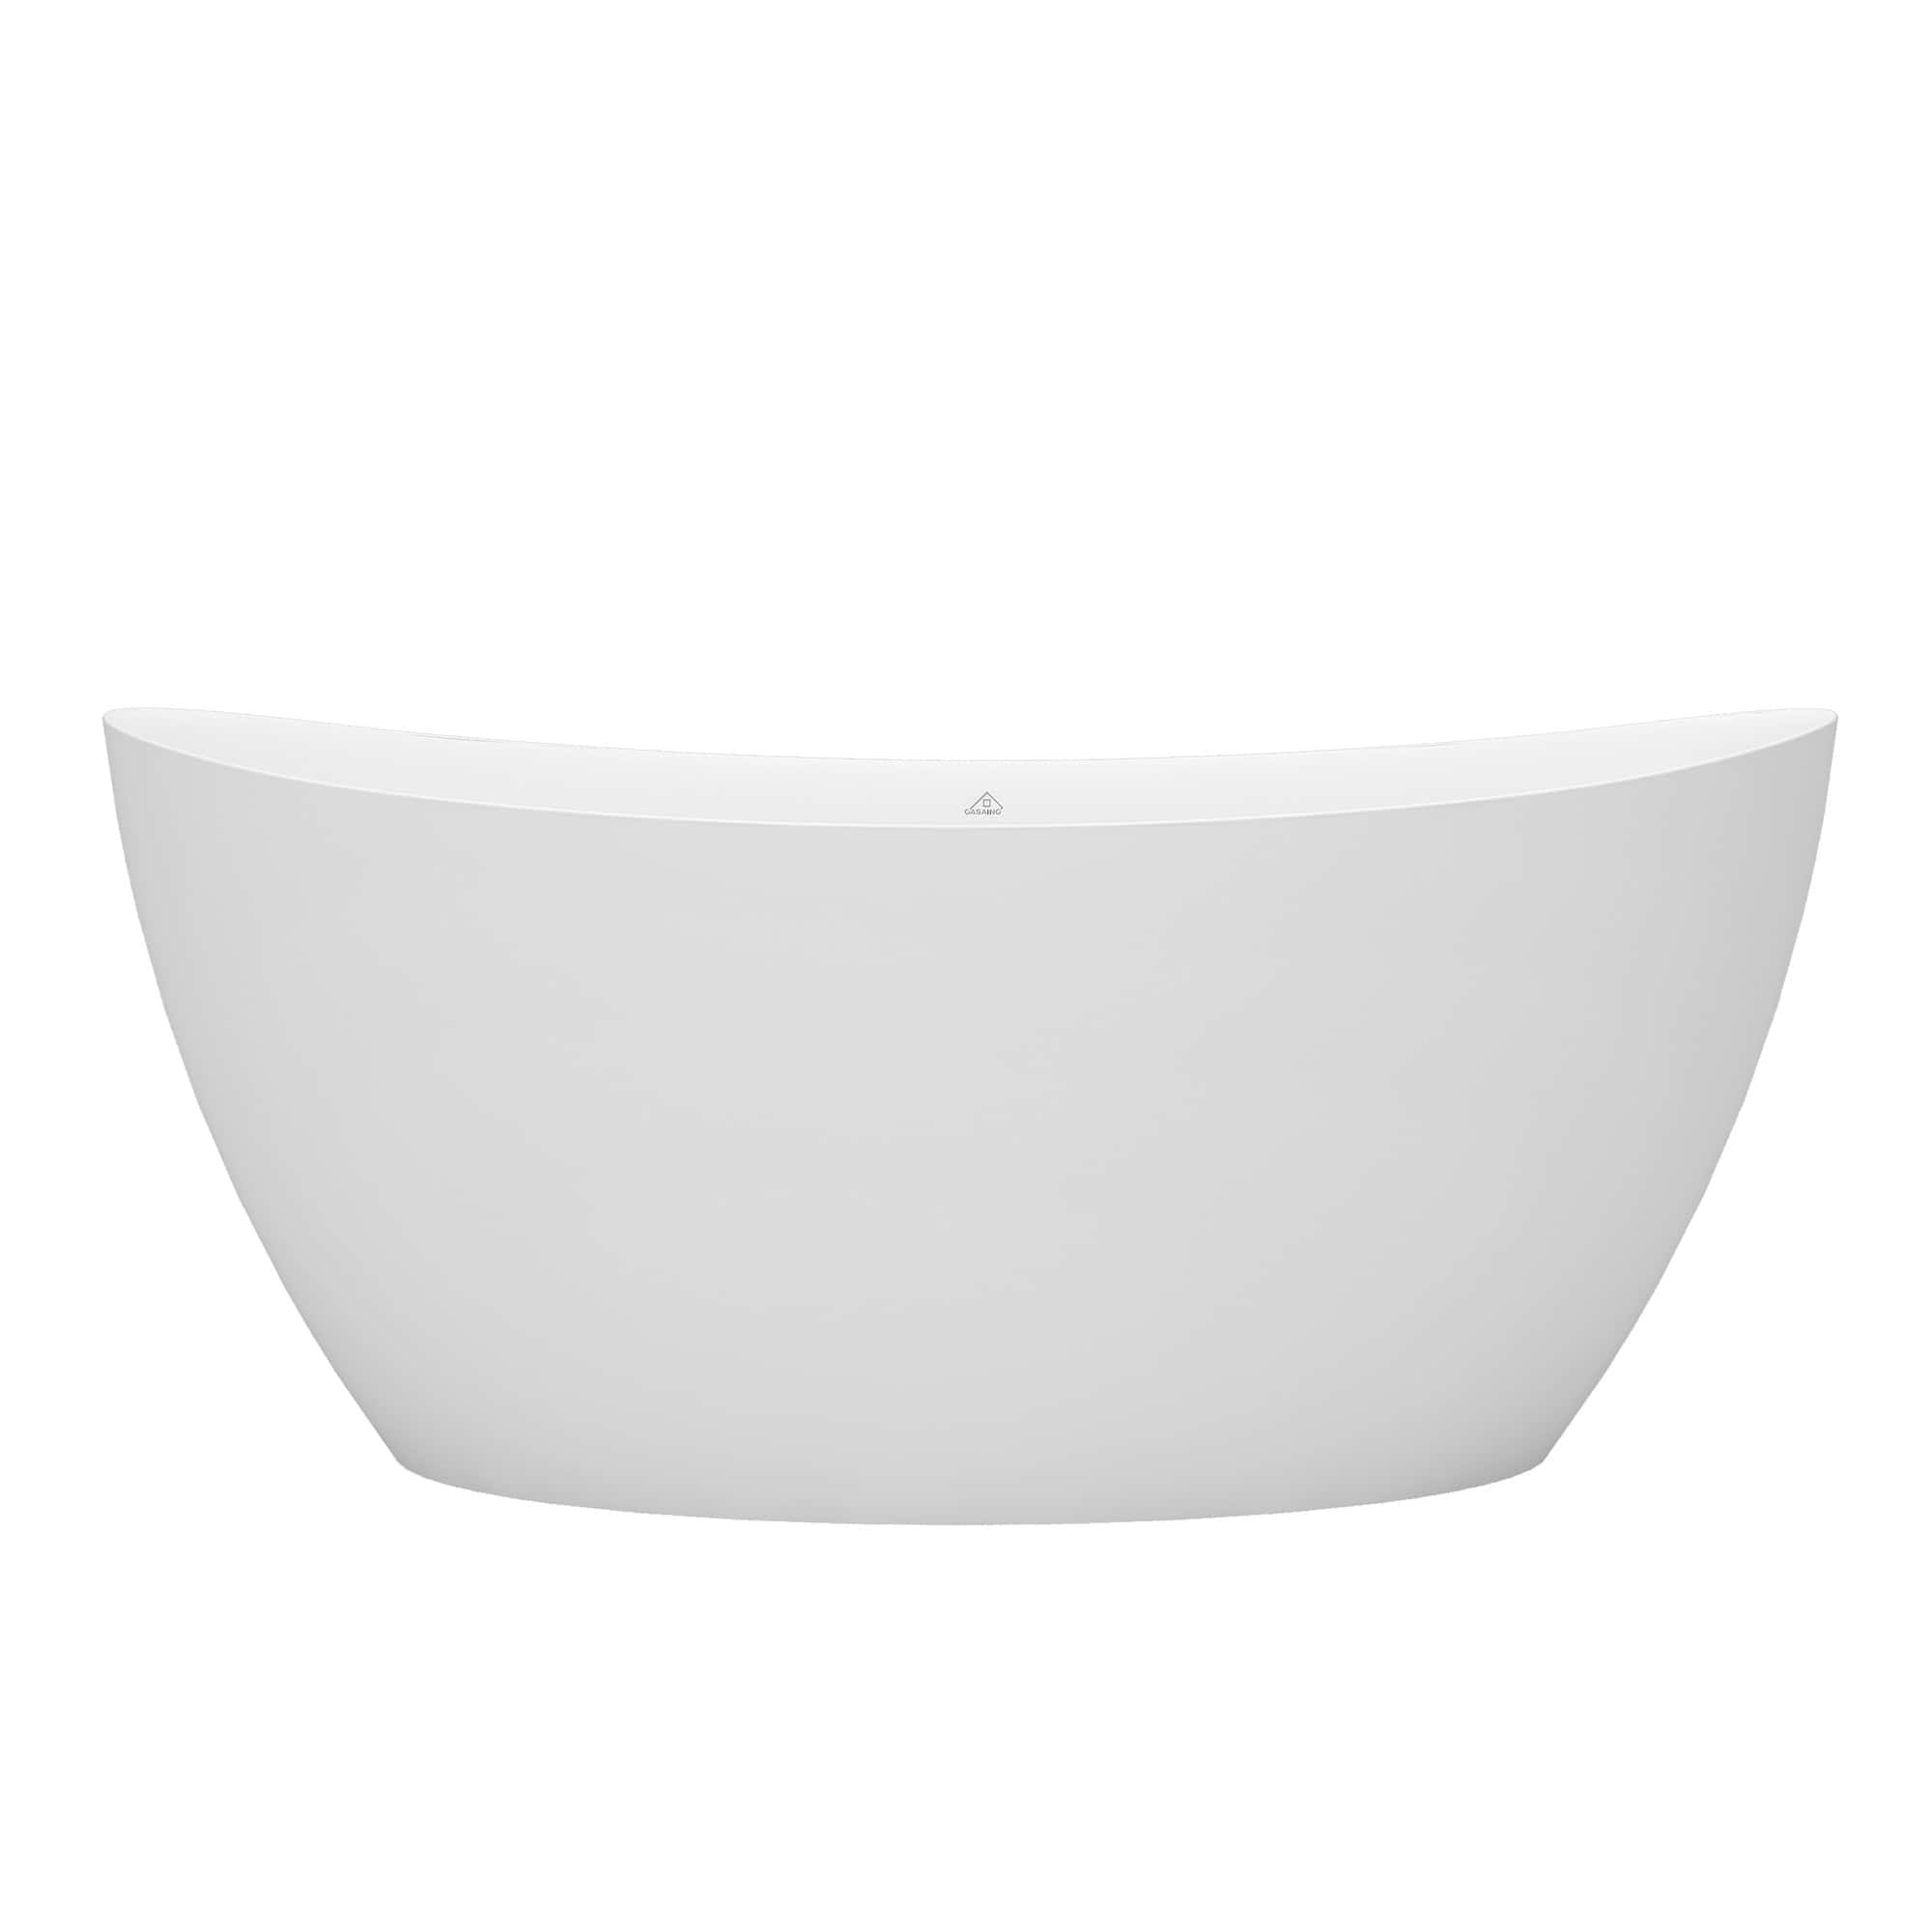 CASAINC 59/67 Inch Matte White Independent Double-headed Raised Solid Surface Soaking Tub, Soaking Depth: 14-15"